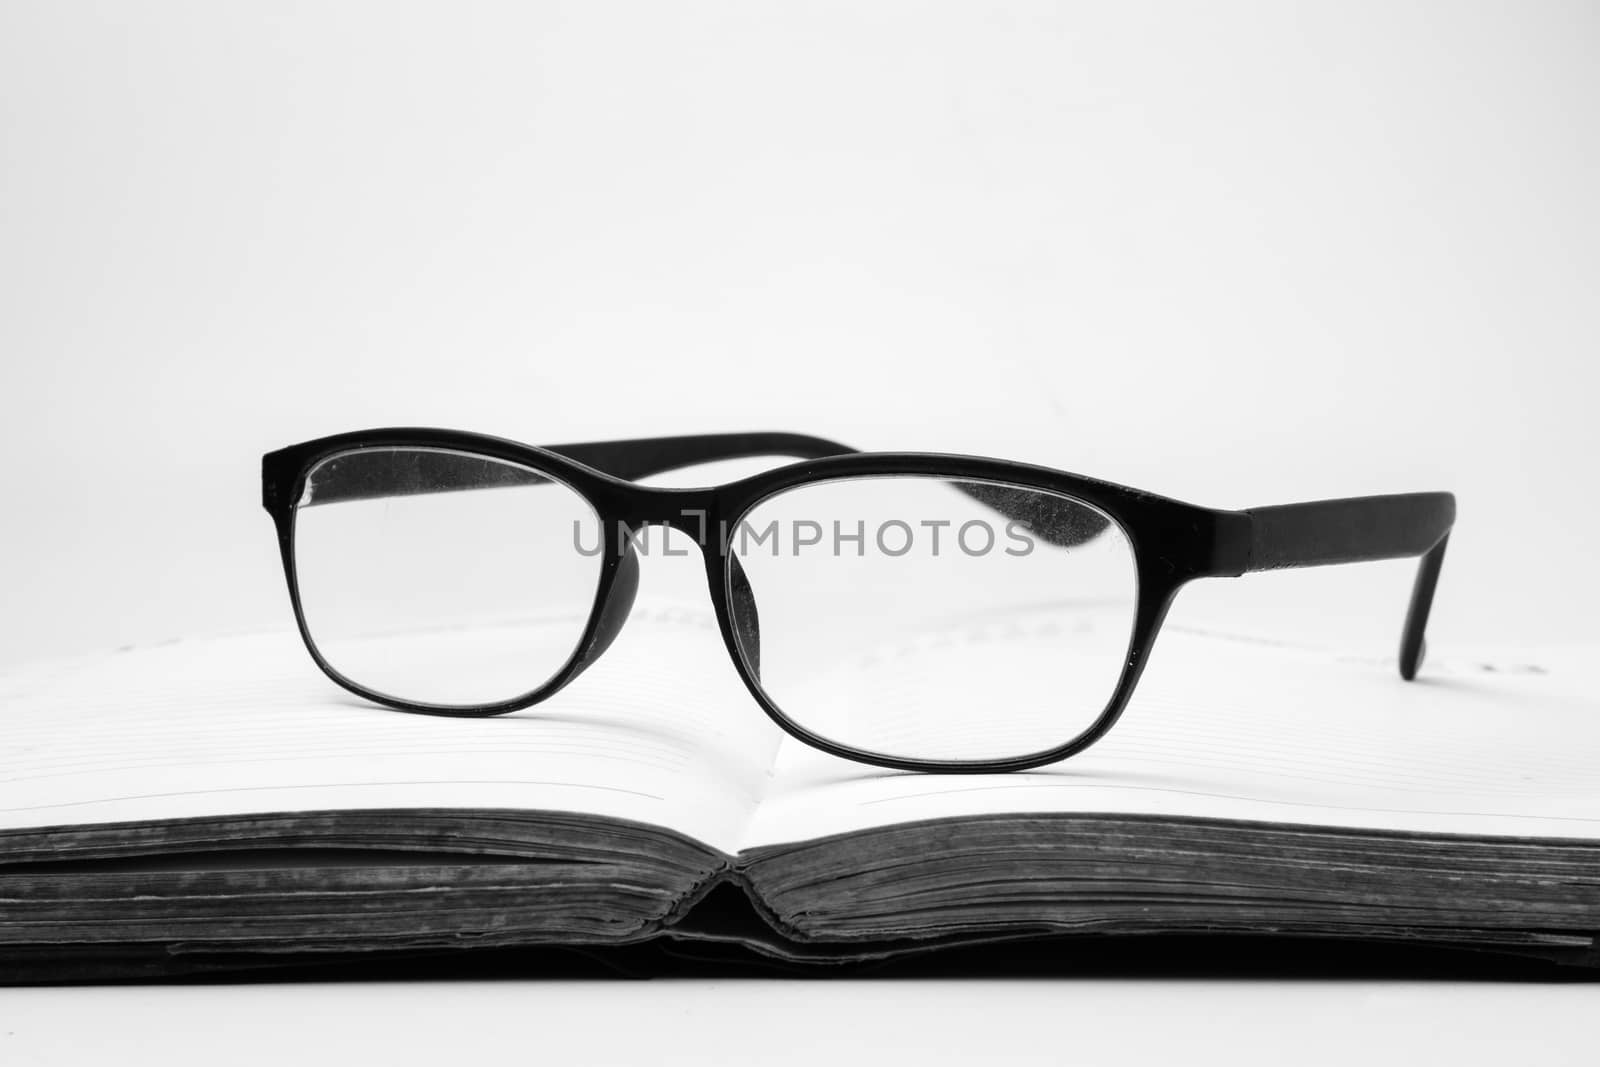 Eyeglasses on an open book, Black and White tone by ronnarong